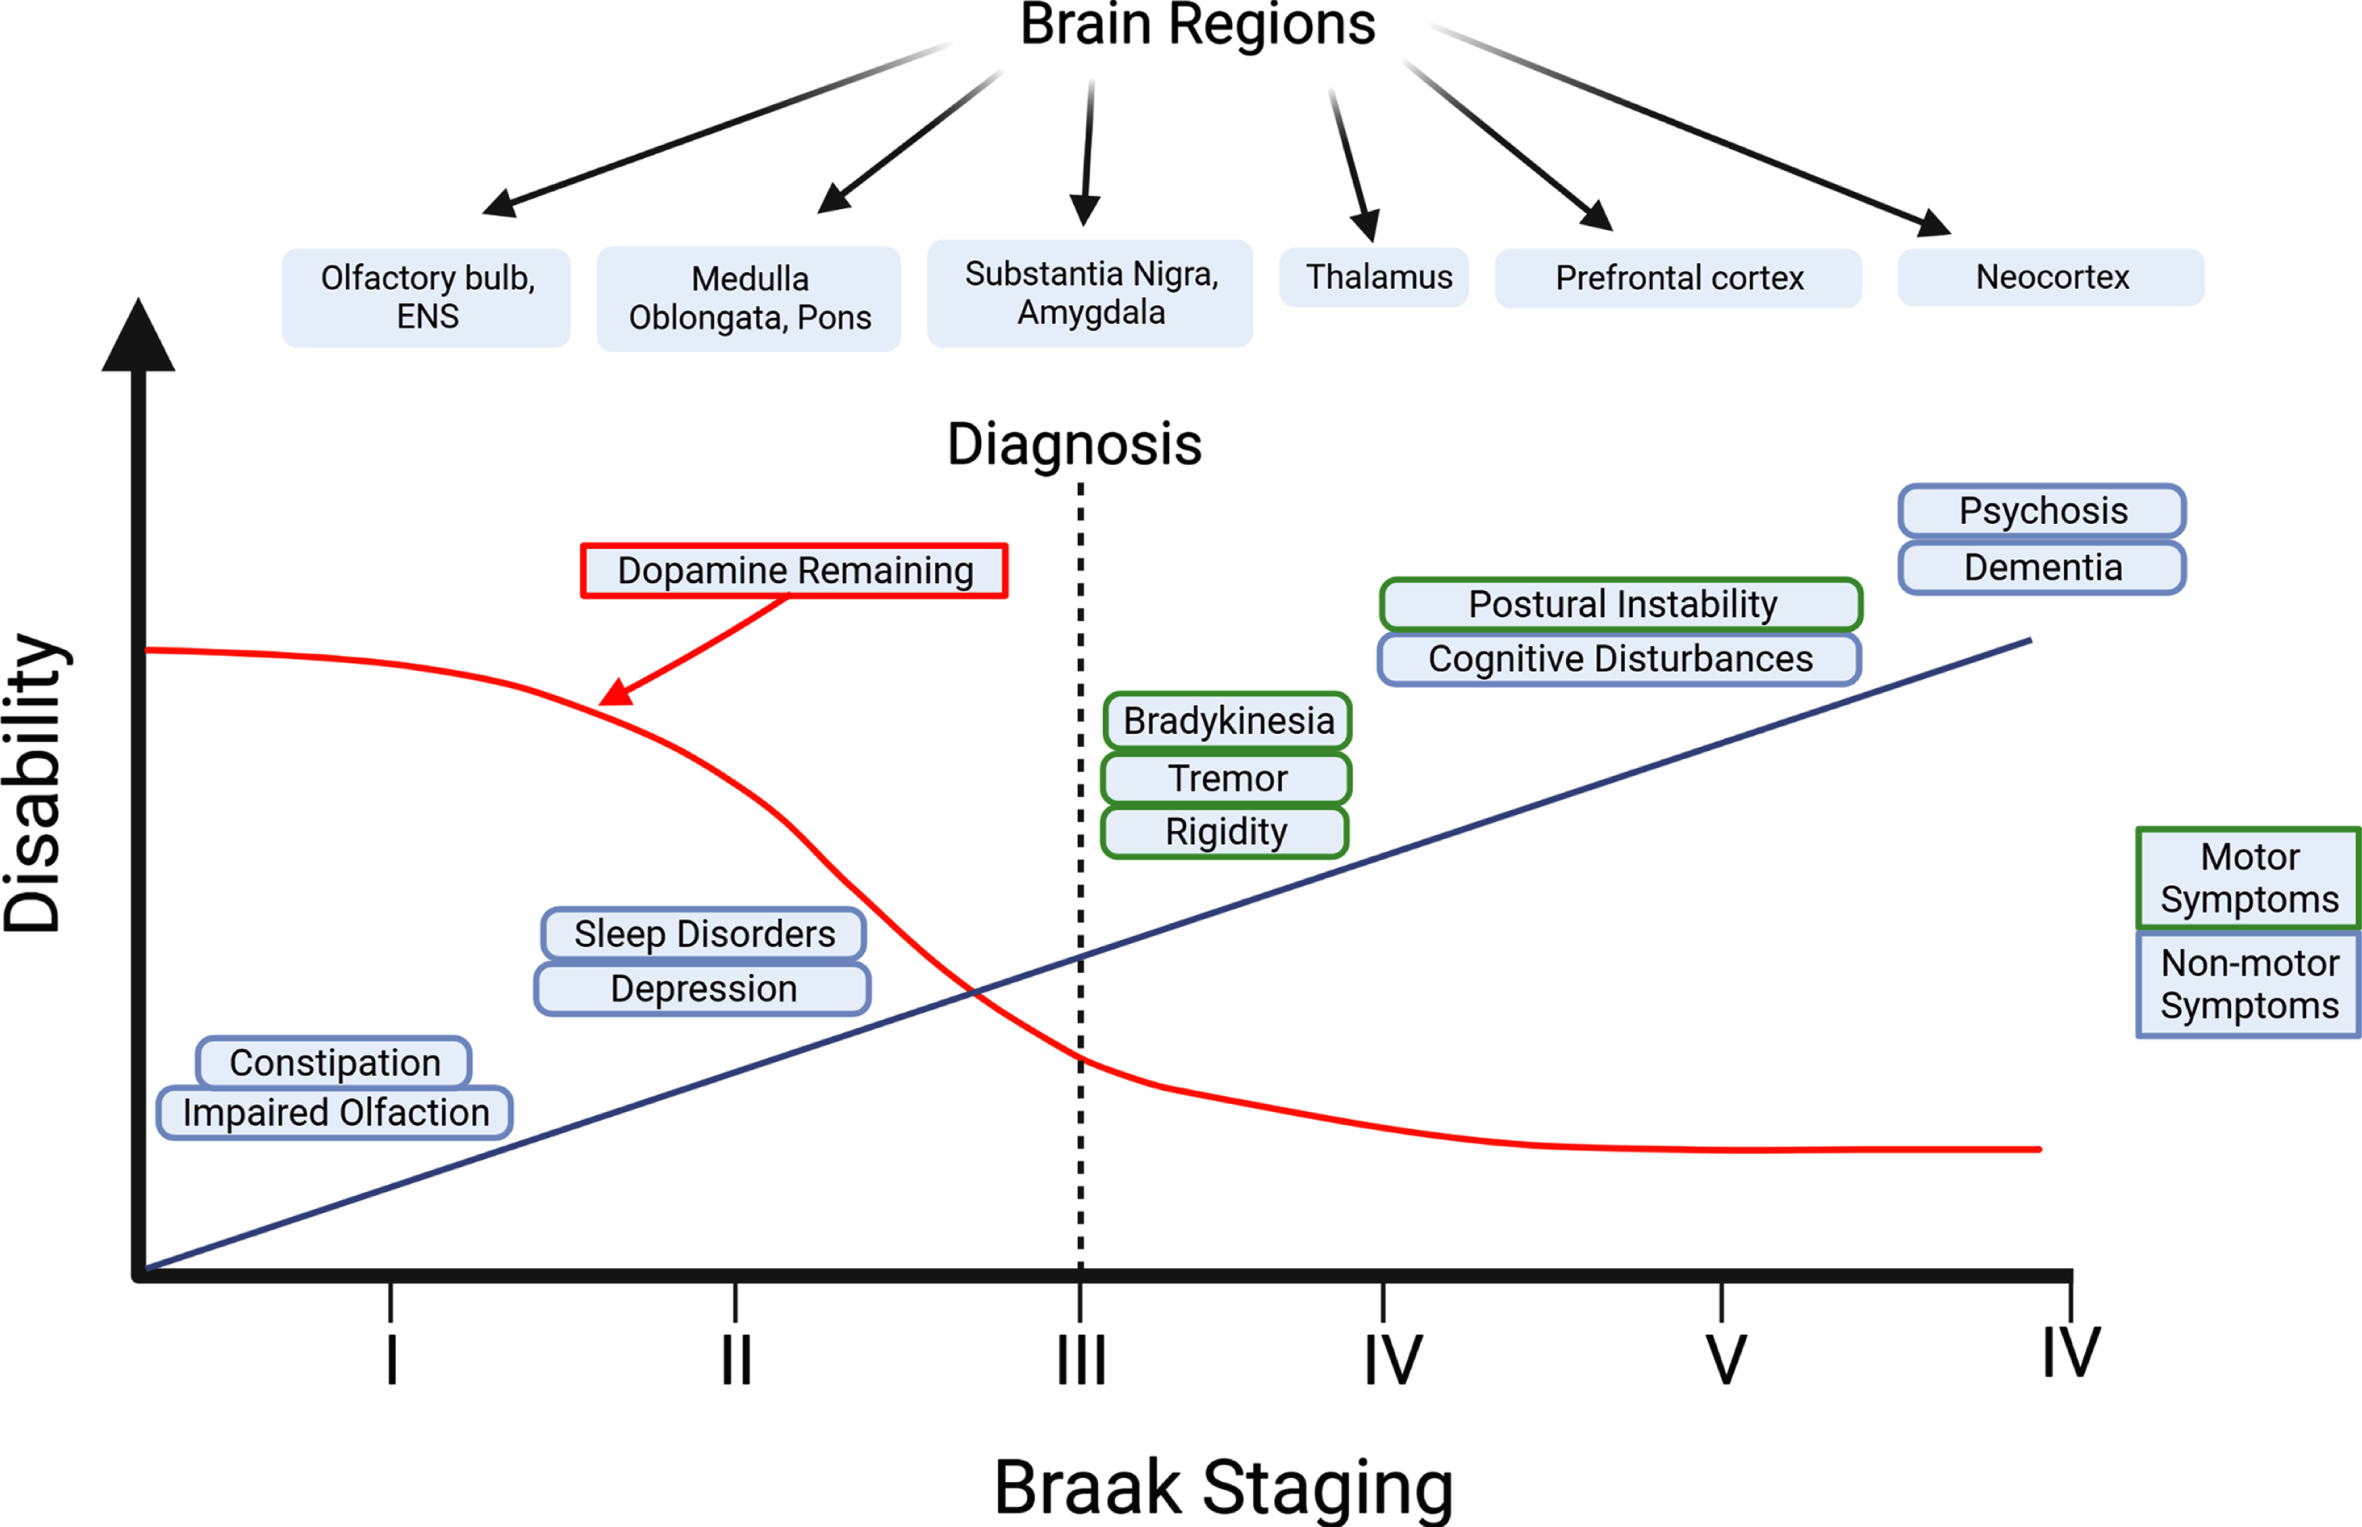 Progression of non-motor and motor symptoms in Parkinson’s disease. In the Braak Model of PD, it is hypothesized that the origin of PD originates in the PNS such as the olfactory bulbs and the ENS (Stage I). Non-motor symptoms can start to appear months or years prior to the onset of motor symptoms. Transmission of pathogenic forms of aSyn is thought to spread throughout the body in a prion-like manner, where aggregated aSyn can travel from the ENS to the brain via the vagus nerve. The diagnosis of PD is made once motor symptoms become apparent (Stage III). Long-term progression of PD causes a decrease in dopamine levels in the brain and an increase in the severity of motor and non-motor symptoms such as postural instability and cognitive disturbances, resulting in a dramatic decline in the quality of life of PD patients. Created with BioRender.com.